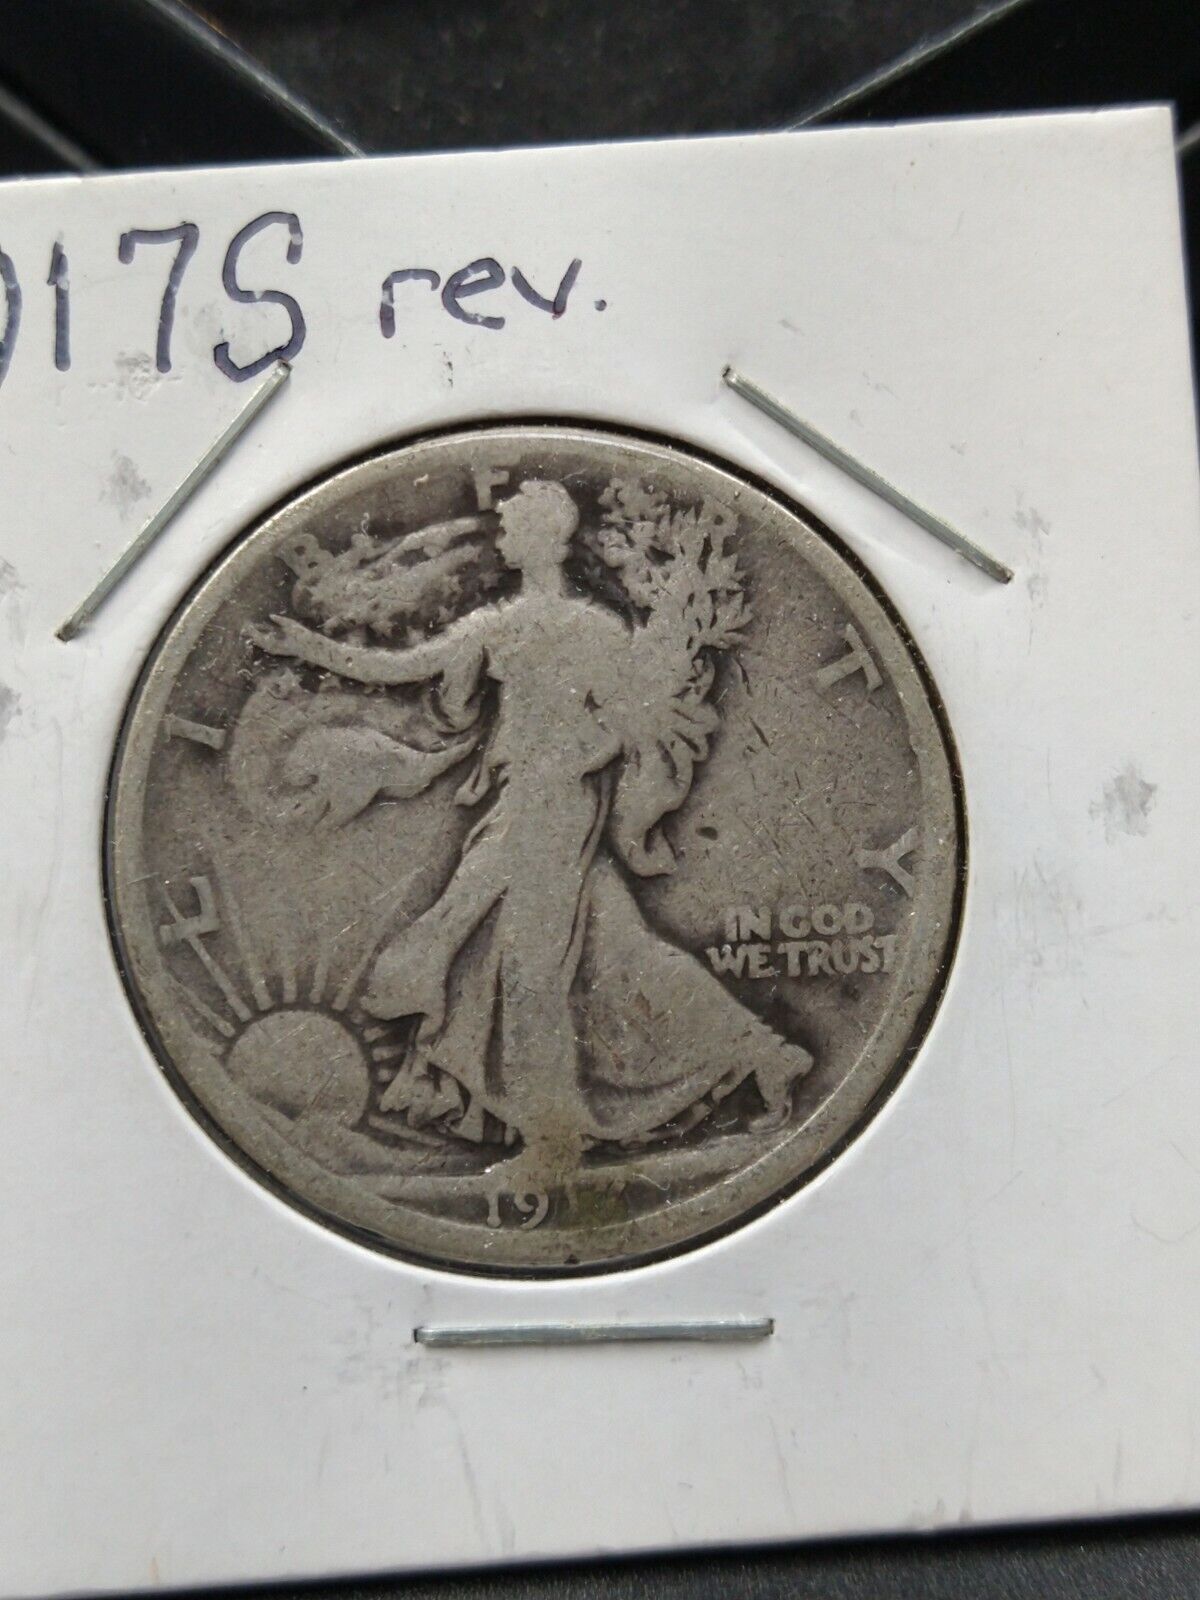 1917 S REV MM Walking Liberty Silver Eagle Coin Choice VG VERY GOOD Reverse MM